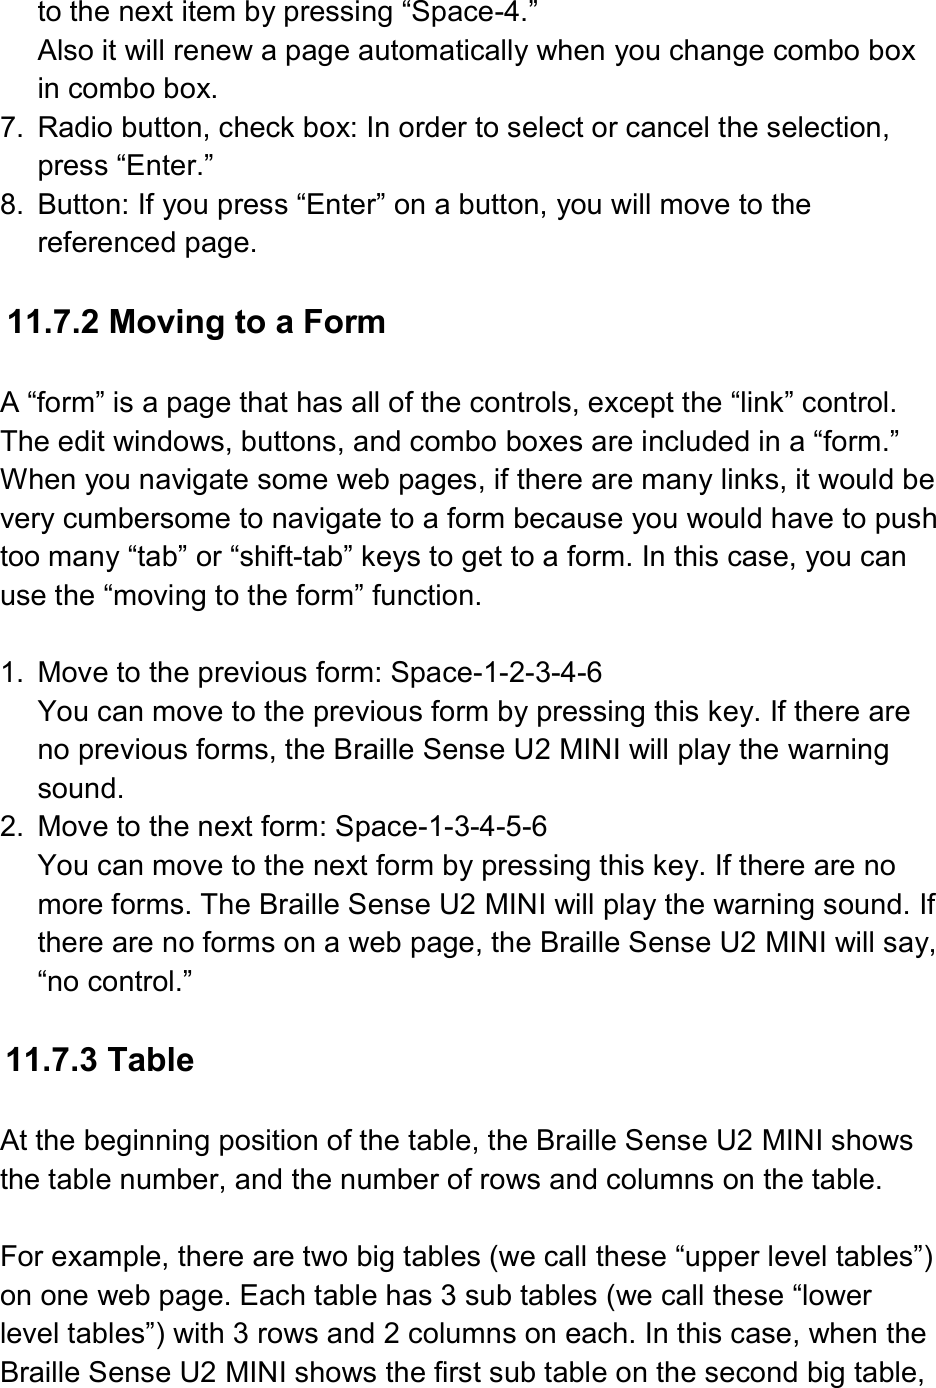  to the next item by pressing “Space-4.” Also it will renew a page automatically when you change combo box in combo box. 7.  Radio button, check box: In order to select or cancel the selection, press “Enter.” 8.  Button: If you press “Enter” on a button, you will move to the referenced page.  11.7.2 Moving to a Form  A “form” is a page that has all of the controls, except the “link” control. The edit windows, buttons, and combo boxes are included in a “form.” When you navigate some web pages, if there are many links, it would be very cumbersome to navigate to a form because you would have to push too many “tab” or “shift-tab” keys to get to a form. In this case, you can use the “moving to the form” function.  1.  Move to the previous form: Space-1-2-3-4-6 You can move to the previous form by pressing this key. If there are no previous forms, the Braille Sense U2 MINI will play the warning sound. 2.  Move to the next form: Space-1-3-4-5-6 You can move to the next form by pressing this key. If there are no more forms. The Braille Sense U2 MINI will play the warning sound. If there are no forms on a web page, the Braille Sense U2 MINI will say, “no control.”  11.7.3 Table  At the beginning position of the table, the Braille Sense U2 MINI shows the table number, and the number of rows and columns on the table.  For example, there are two big tables (we call these “upper level tables”) on one web page. Each table has 3 sub tables (we call these “lower level tables”) with 3 rows and 2 columns on each. In this case, when the Braille Sense U2 MINI shows the first sub table on the second big table, 